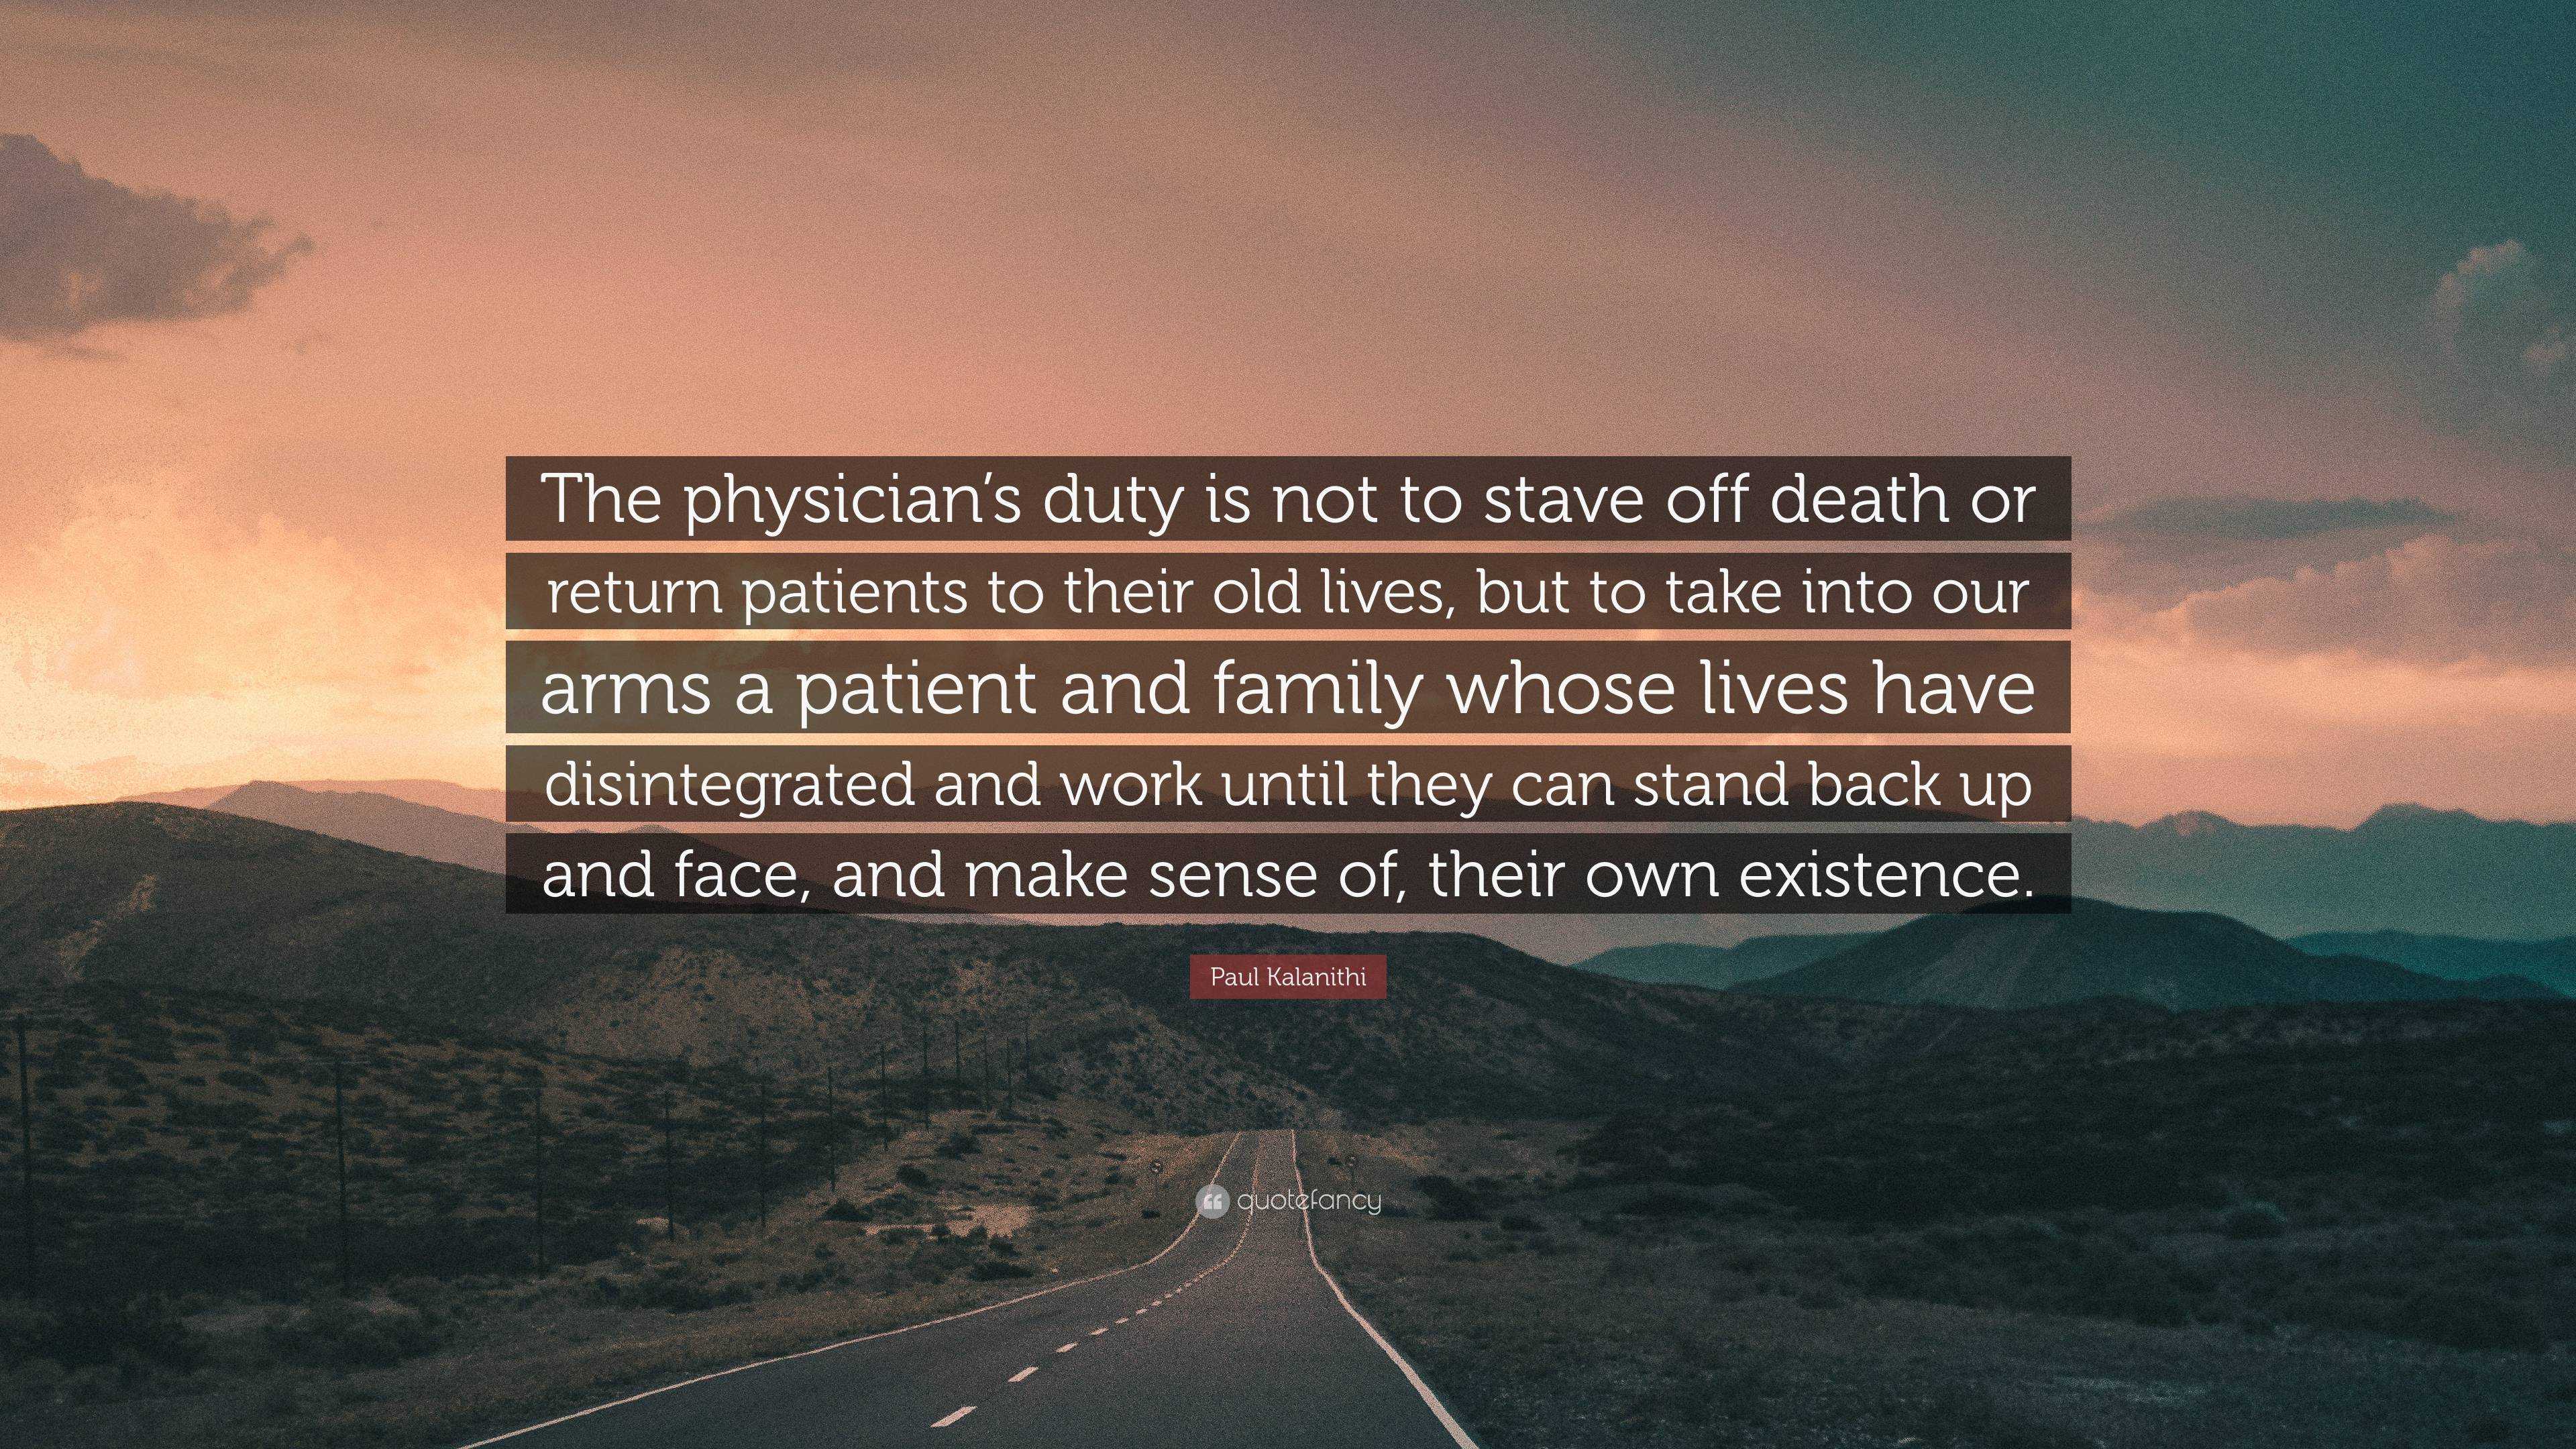 Paul Kalanithi Quote: “The physician’s duty is not to stave off death